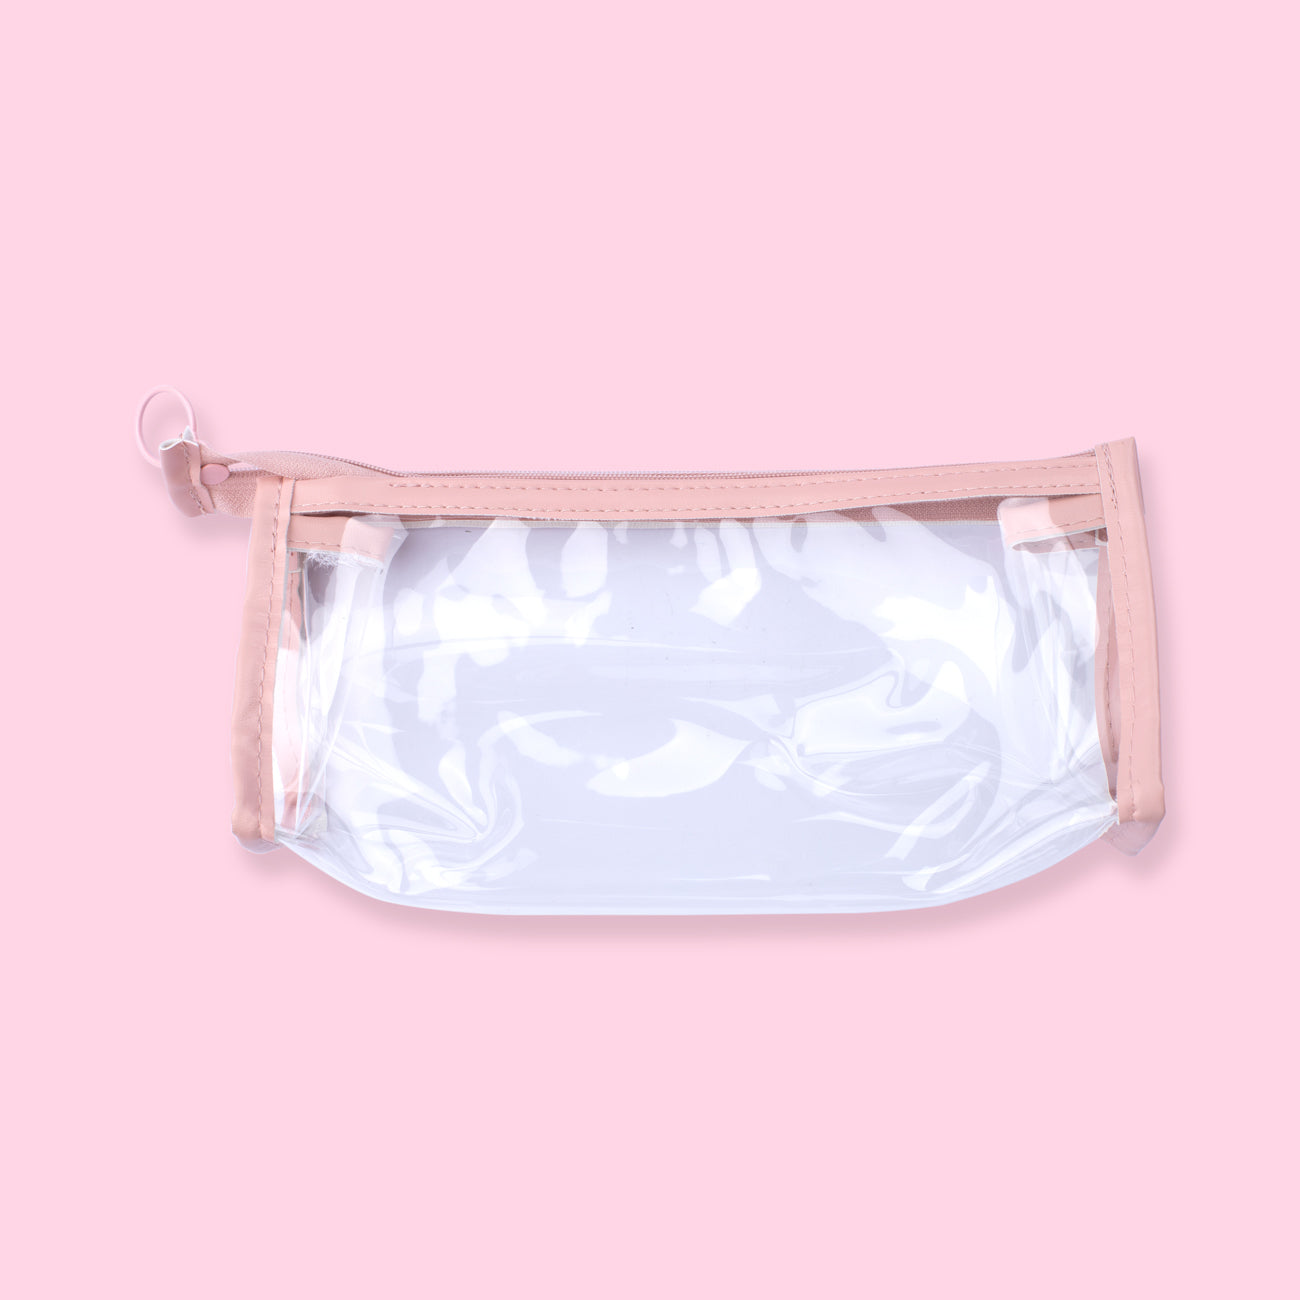 Pink pencil case isolated on a transparent background 21333129 PNG